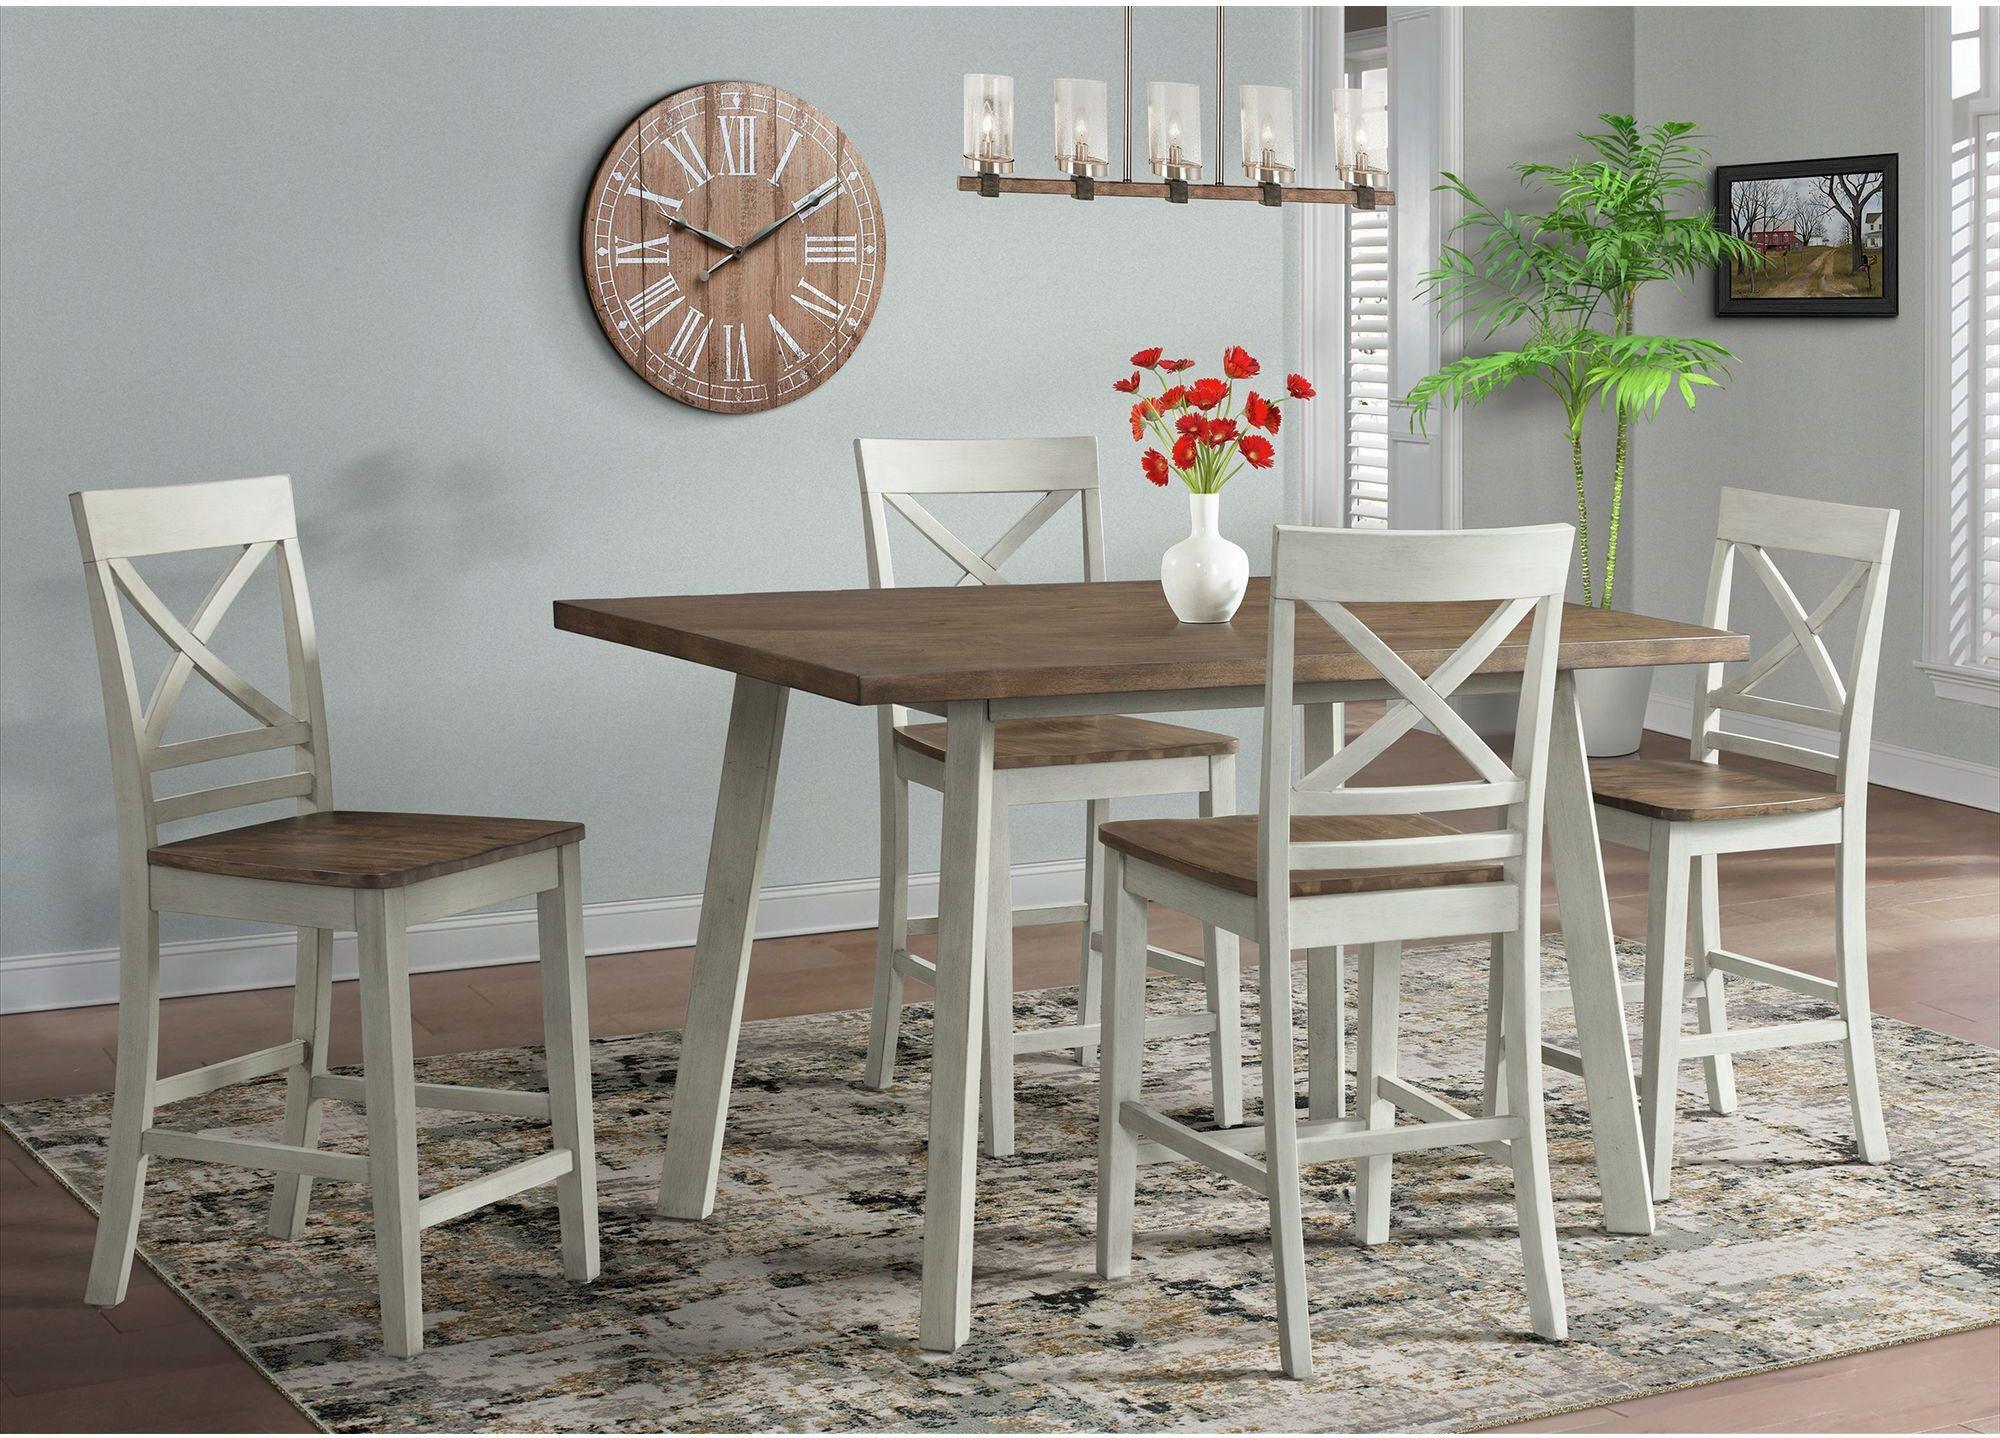 Elements Barstools - Bedford Counter Height Side Chair Set in Natural